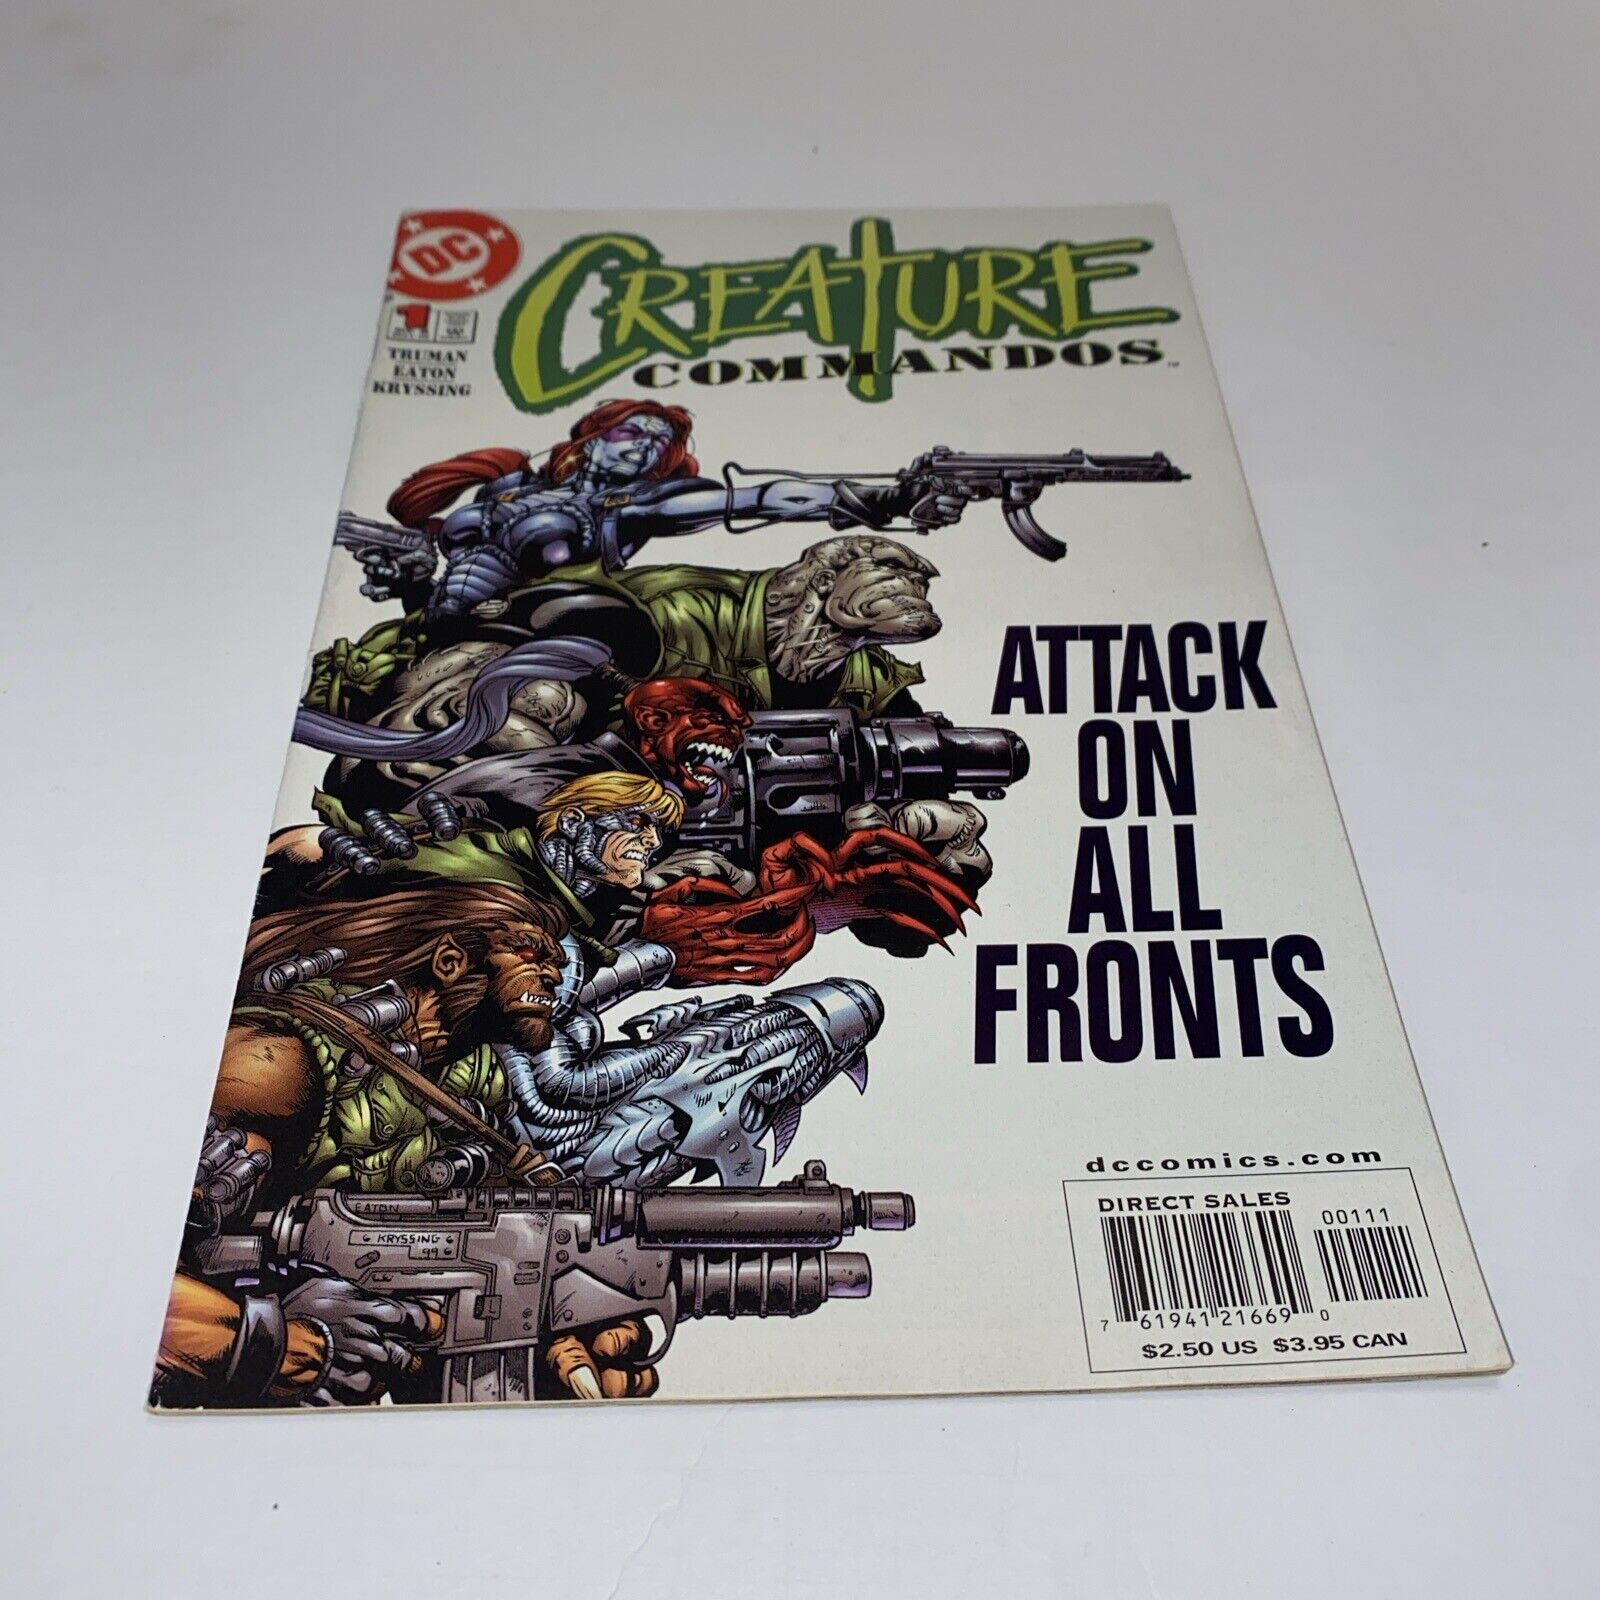 DC Comics Creature Commandos Attack On All Fronts #1 Modern Age May 2000